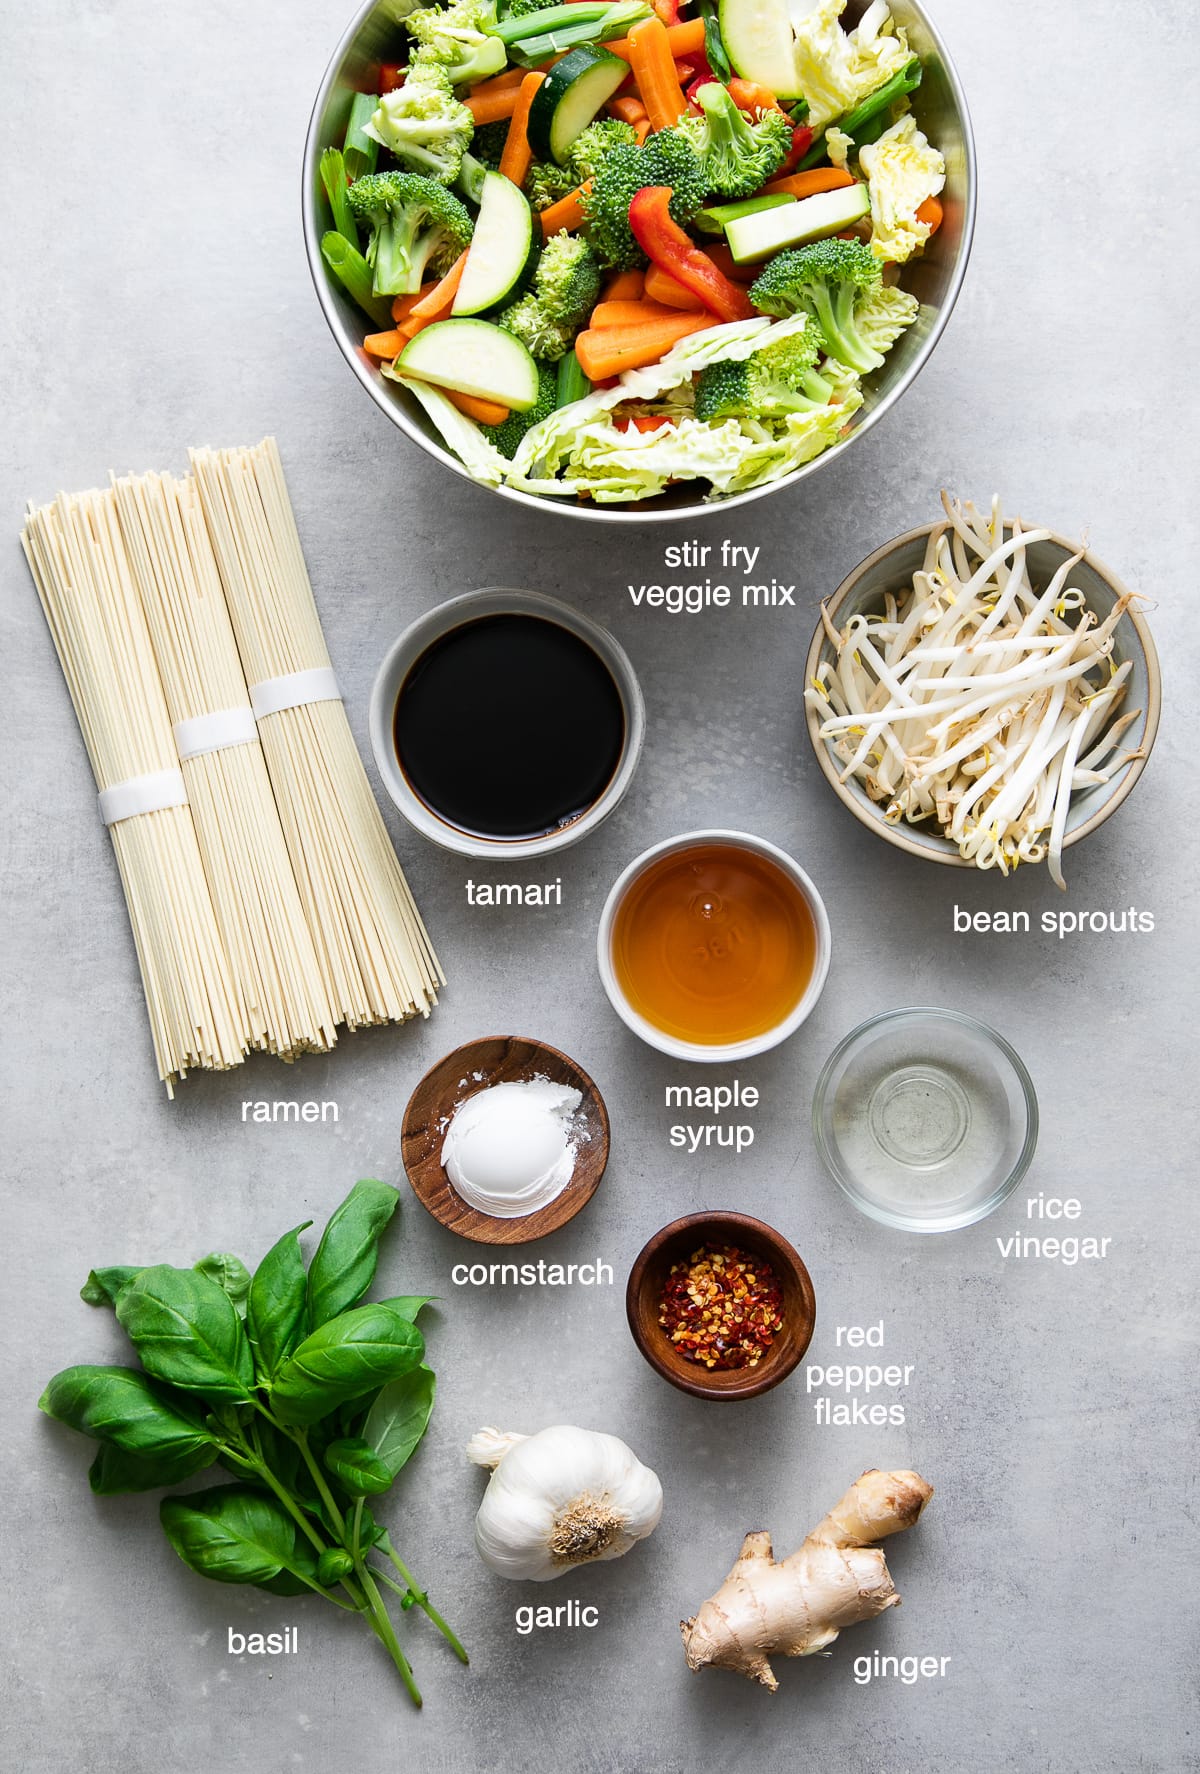 top down view of ingredients used to make ramen noodle stir fry recipe with veggies.